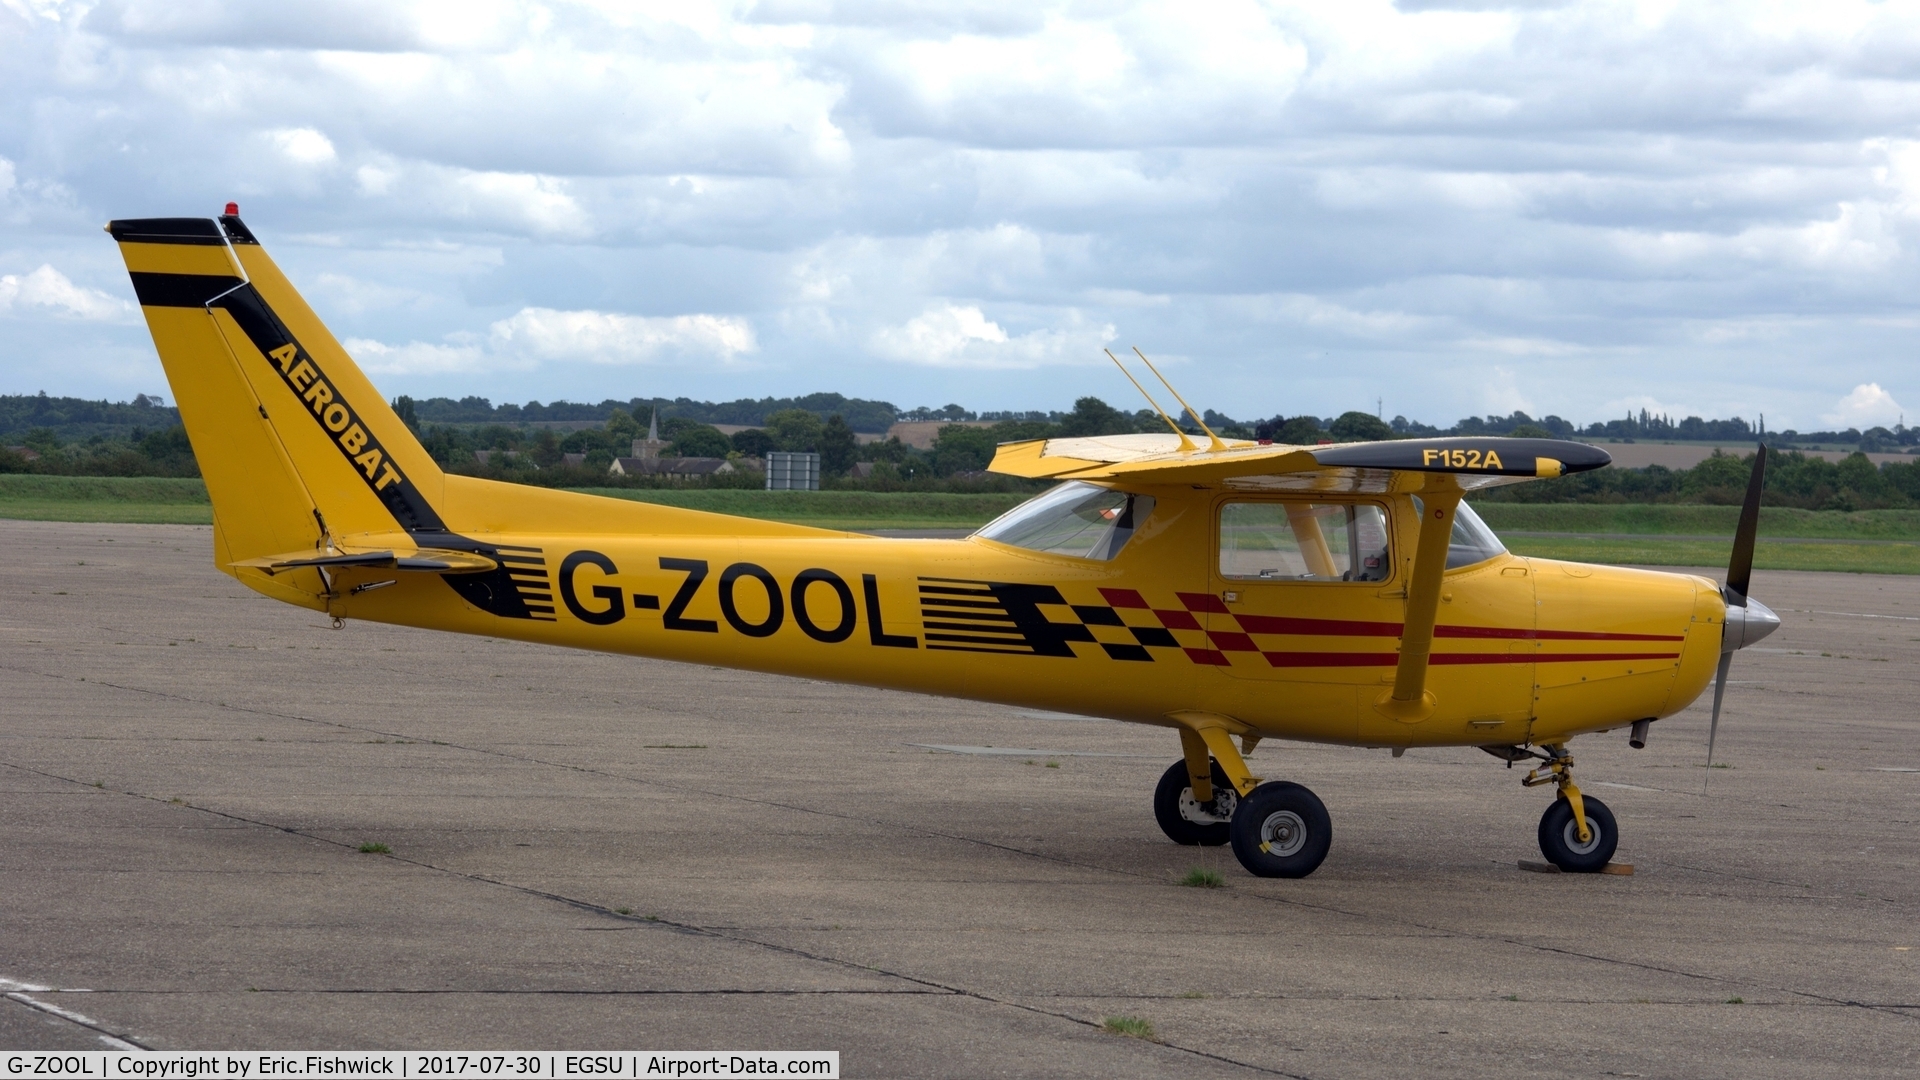 G-ZOOL, 1979 Reims FA152 Aerobat C/N 0357, 2. G-ZOOL at The Imperial War Museum, Duxford, July, 2017.